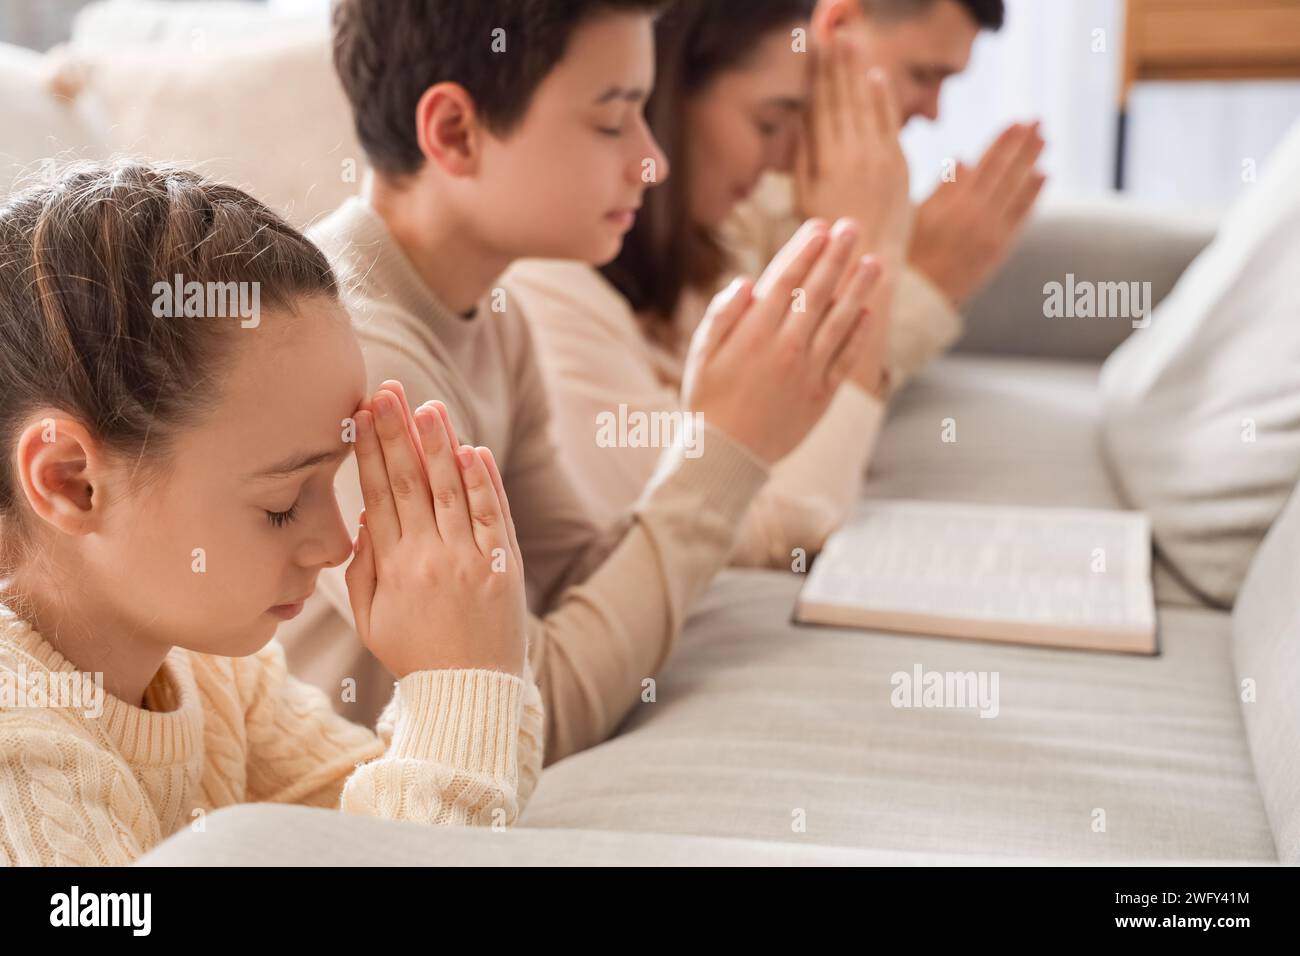 Little girl with her family praying behind sofa at home, closeup Stock Photo